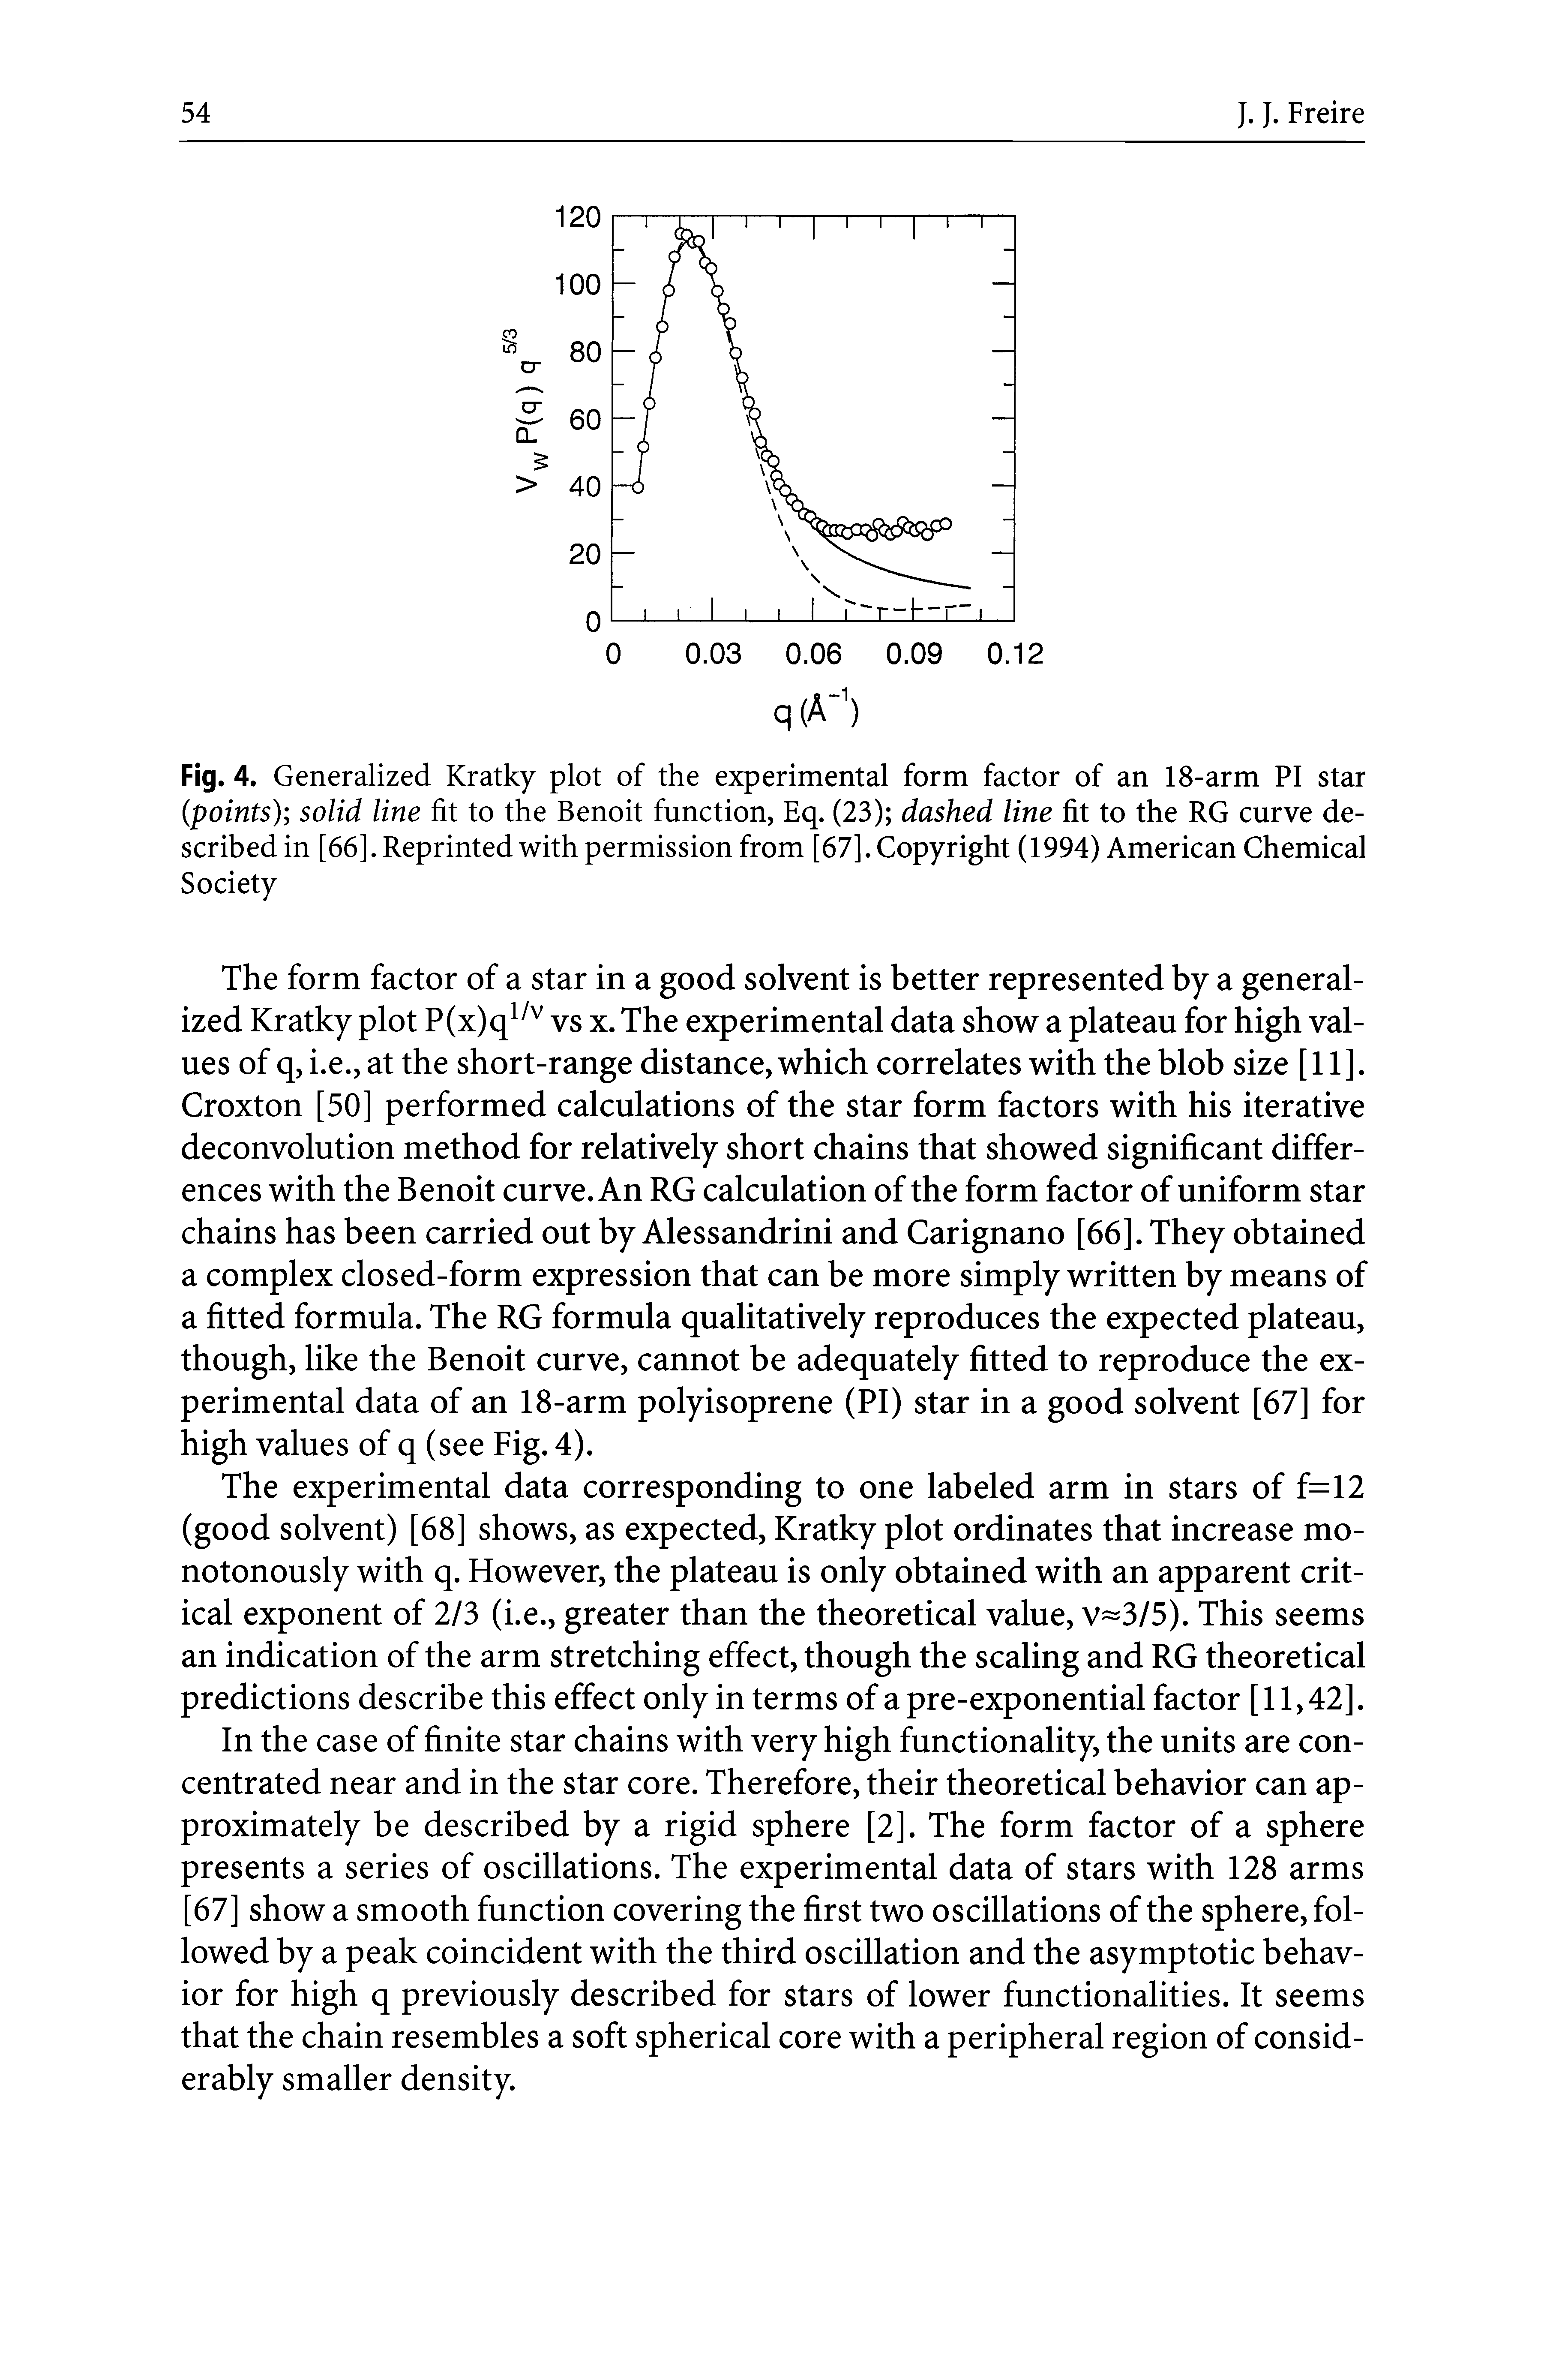 Fig. 4. Generalized Kratky plot of the experimental form factor of an 18-arm PI star (points) solid line fit to the Benoit function, Eq. (23) dashed line fit to the RG curve described in [66]. Reprintedwith permission from [67]. Copyright (1994) American Chemical Society...